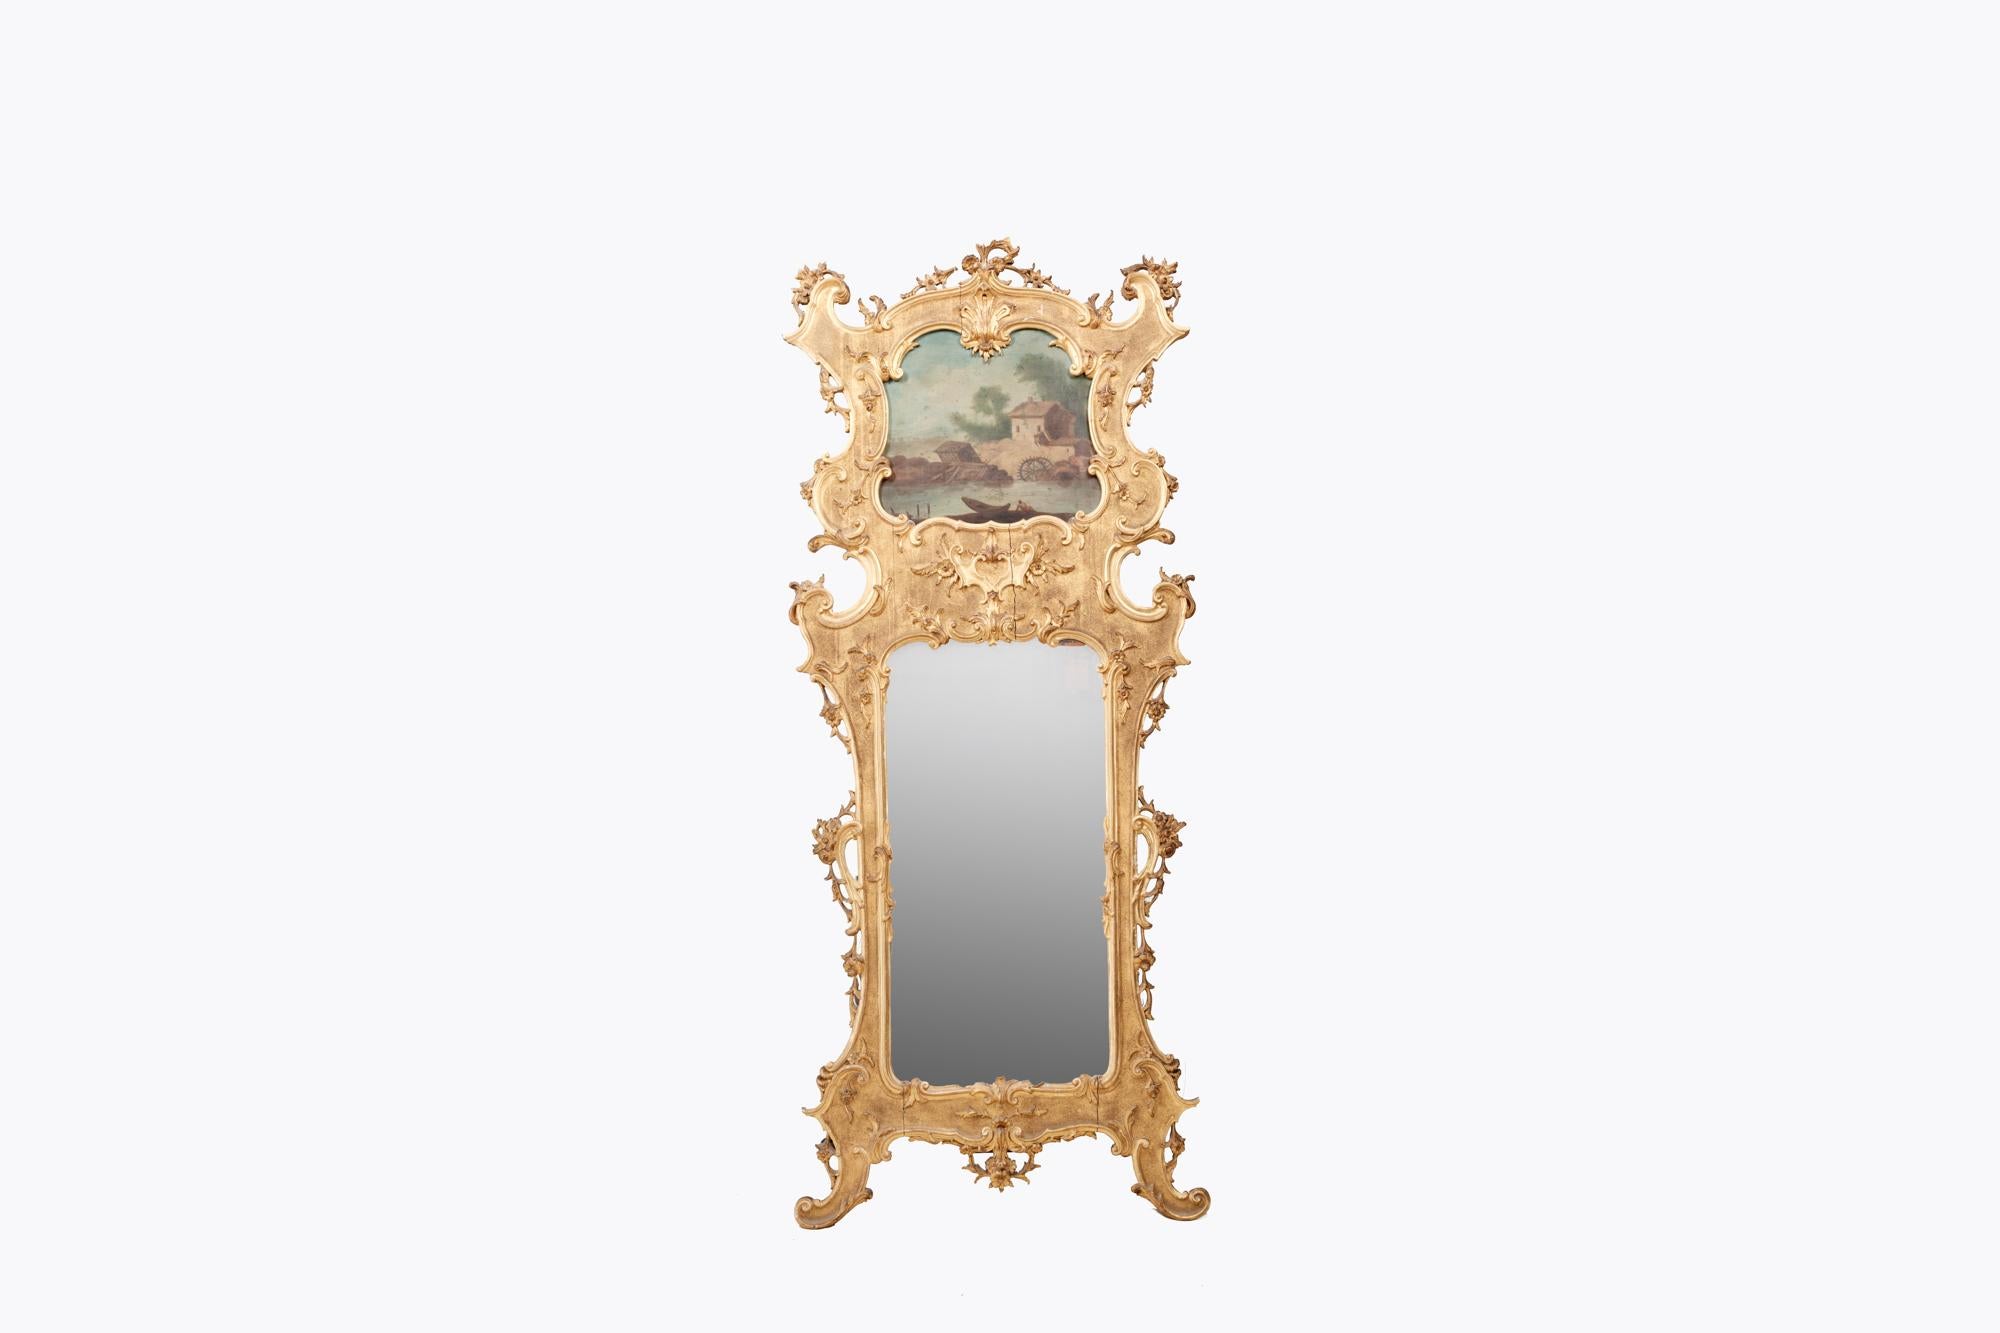 Pair 19th Century of giltwood trumeau pier mirrors with period compartmental plates set within ornate giltwood frames. The frames are intricately carved with S and C scrolls, ribbons, flower heads and acanthus leaves. Framed above the mirror plates